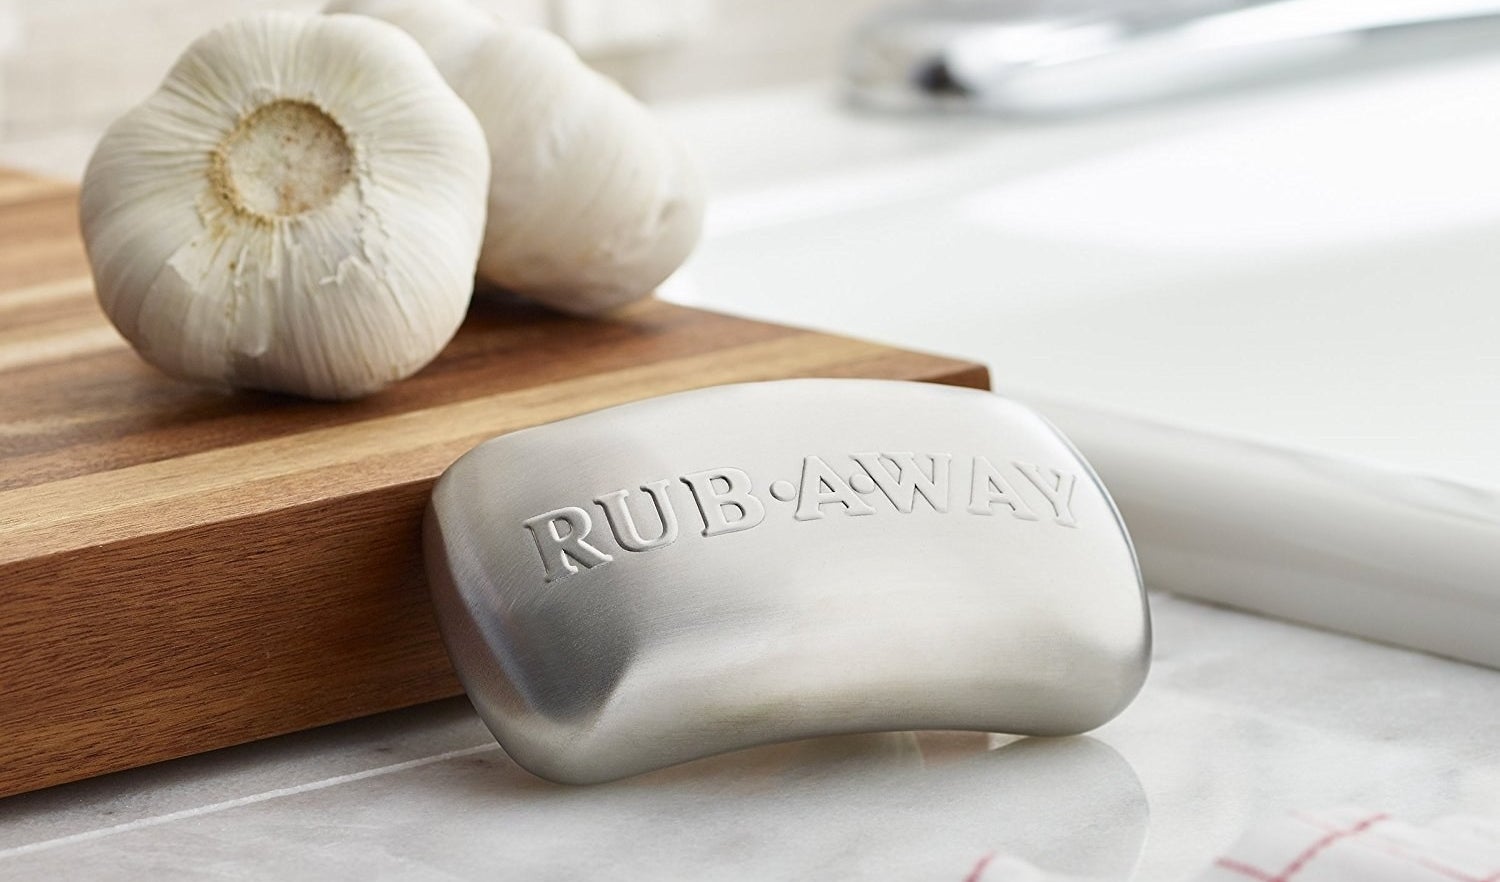 The soap bar-shaped stainless steel, with the text &quot;rub away&quot; on it